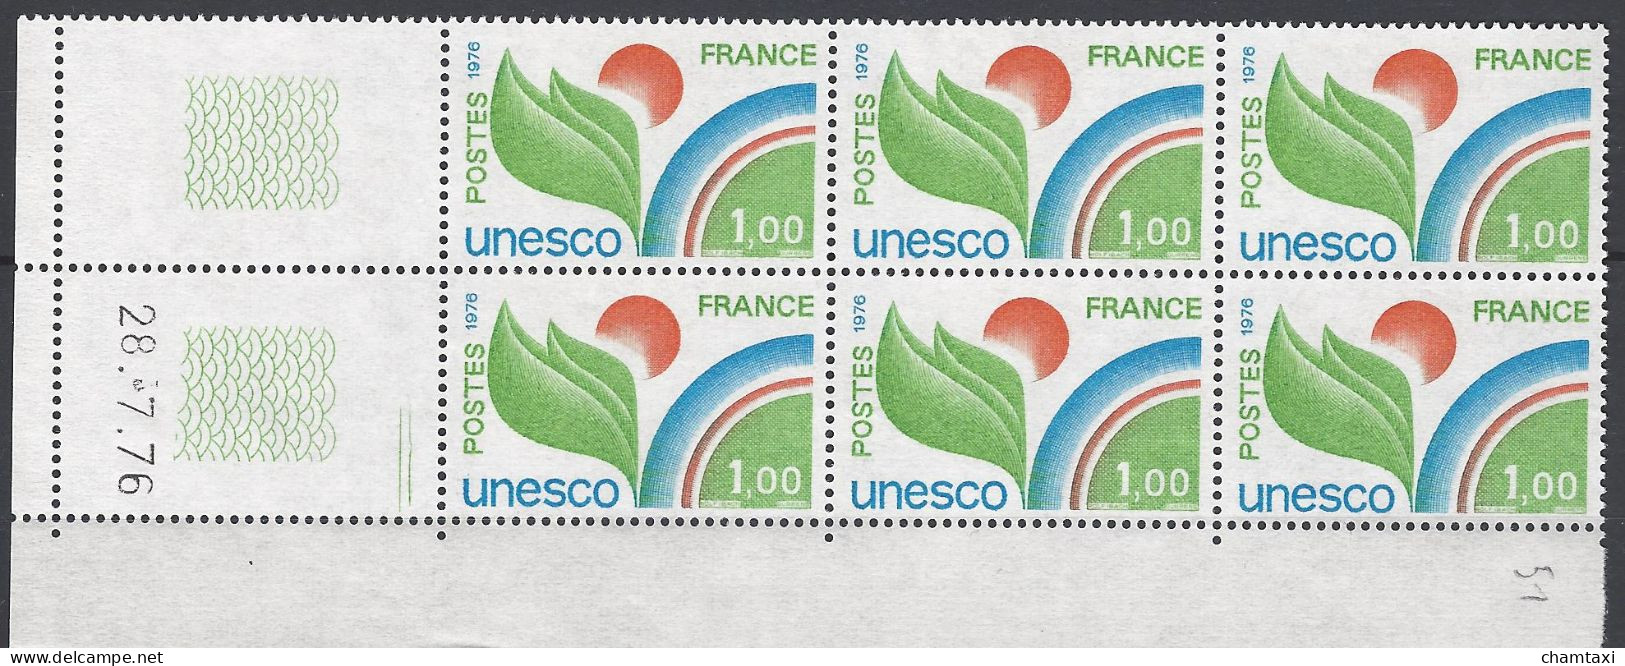 CD 51 FRANCE 1976 TIMBRE SERVICE UNESCO COIN DATE 51 : 28 / 7 / 76 - Service